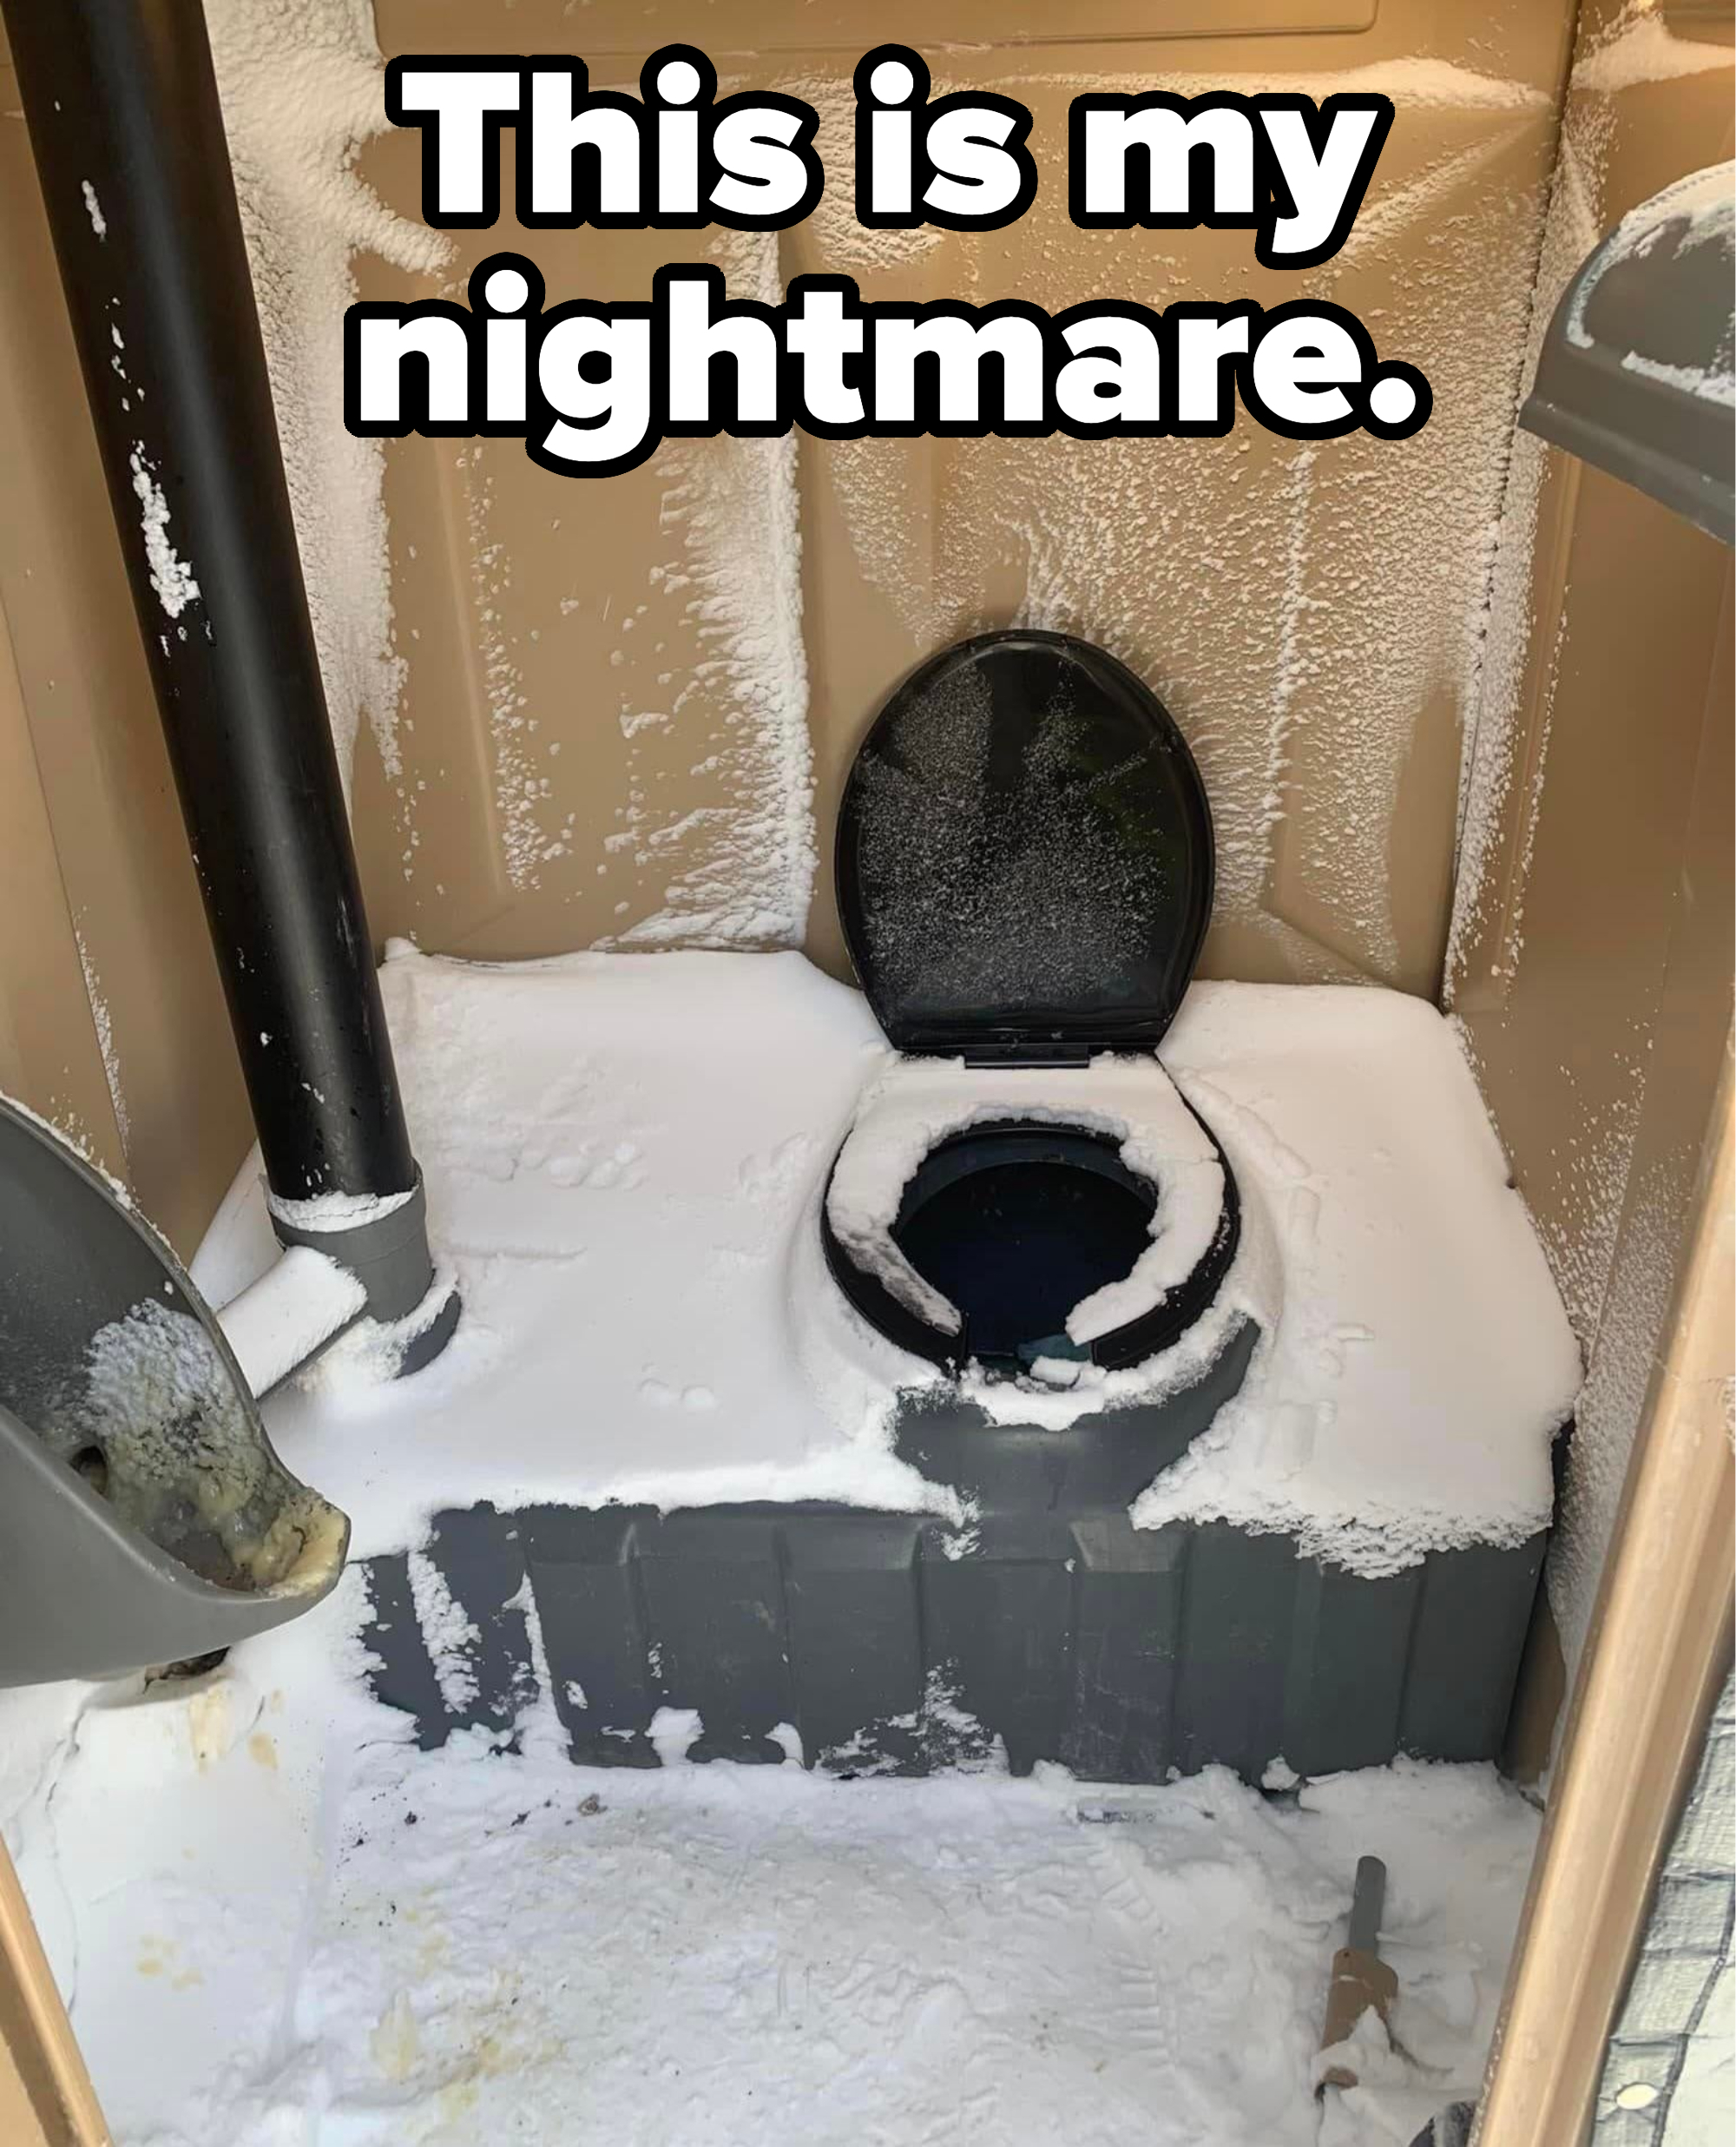 &quot;This is my nightmare&quot;: An outhouse interior with lots of snow